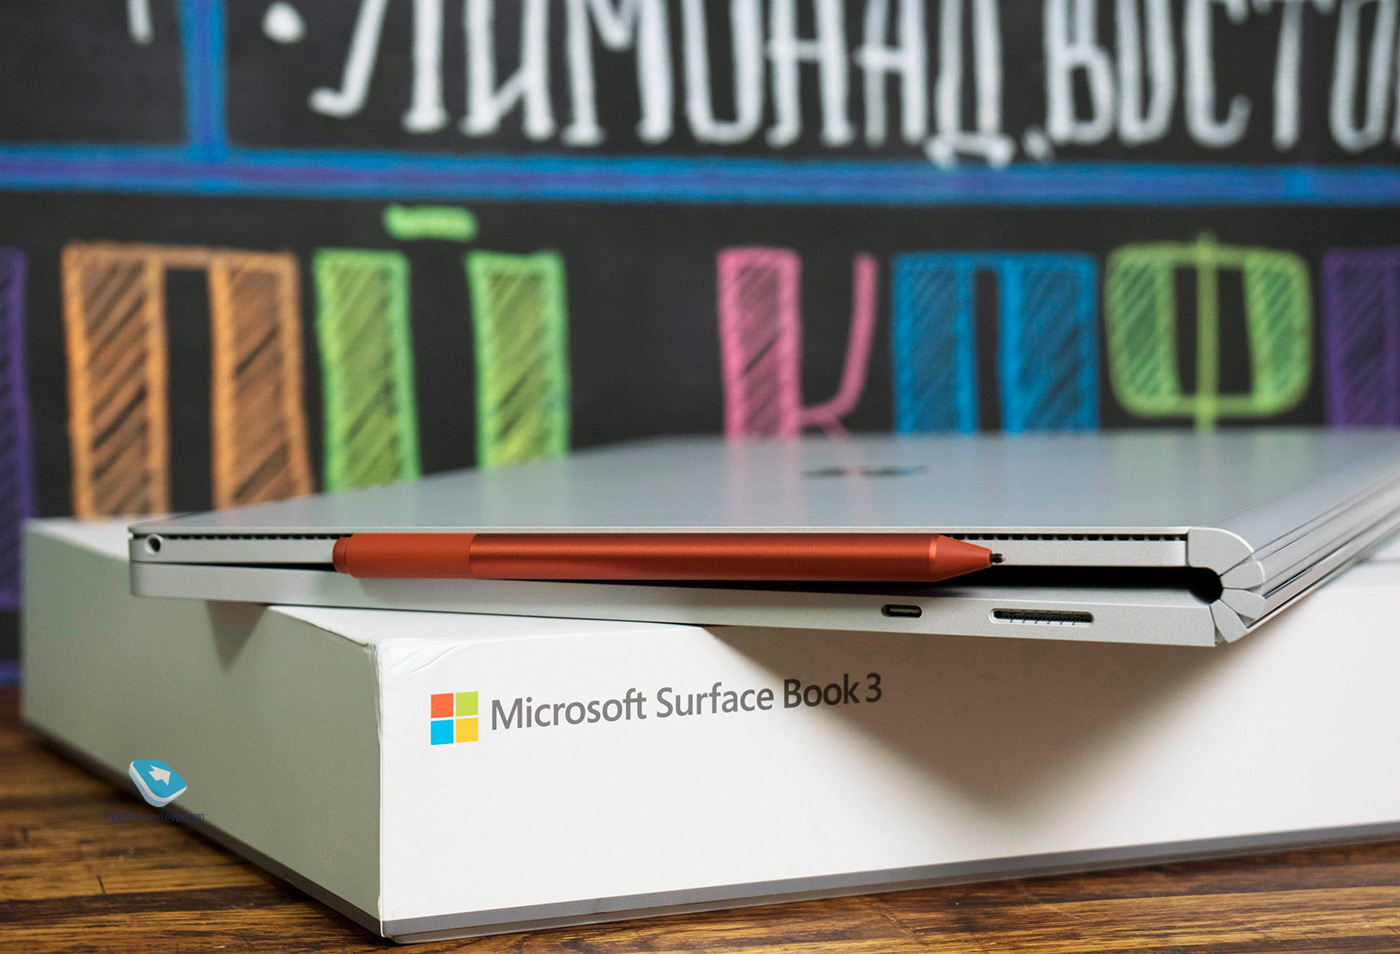 Microsoft's flagship review - Surface Book 3 two-in-one laptop